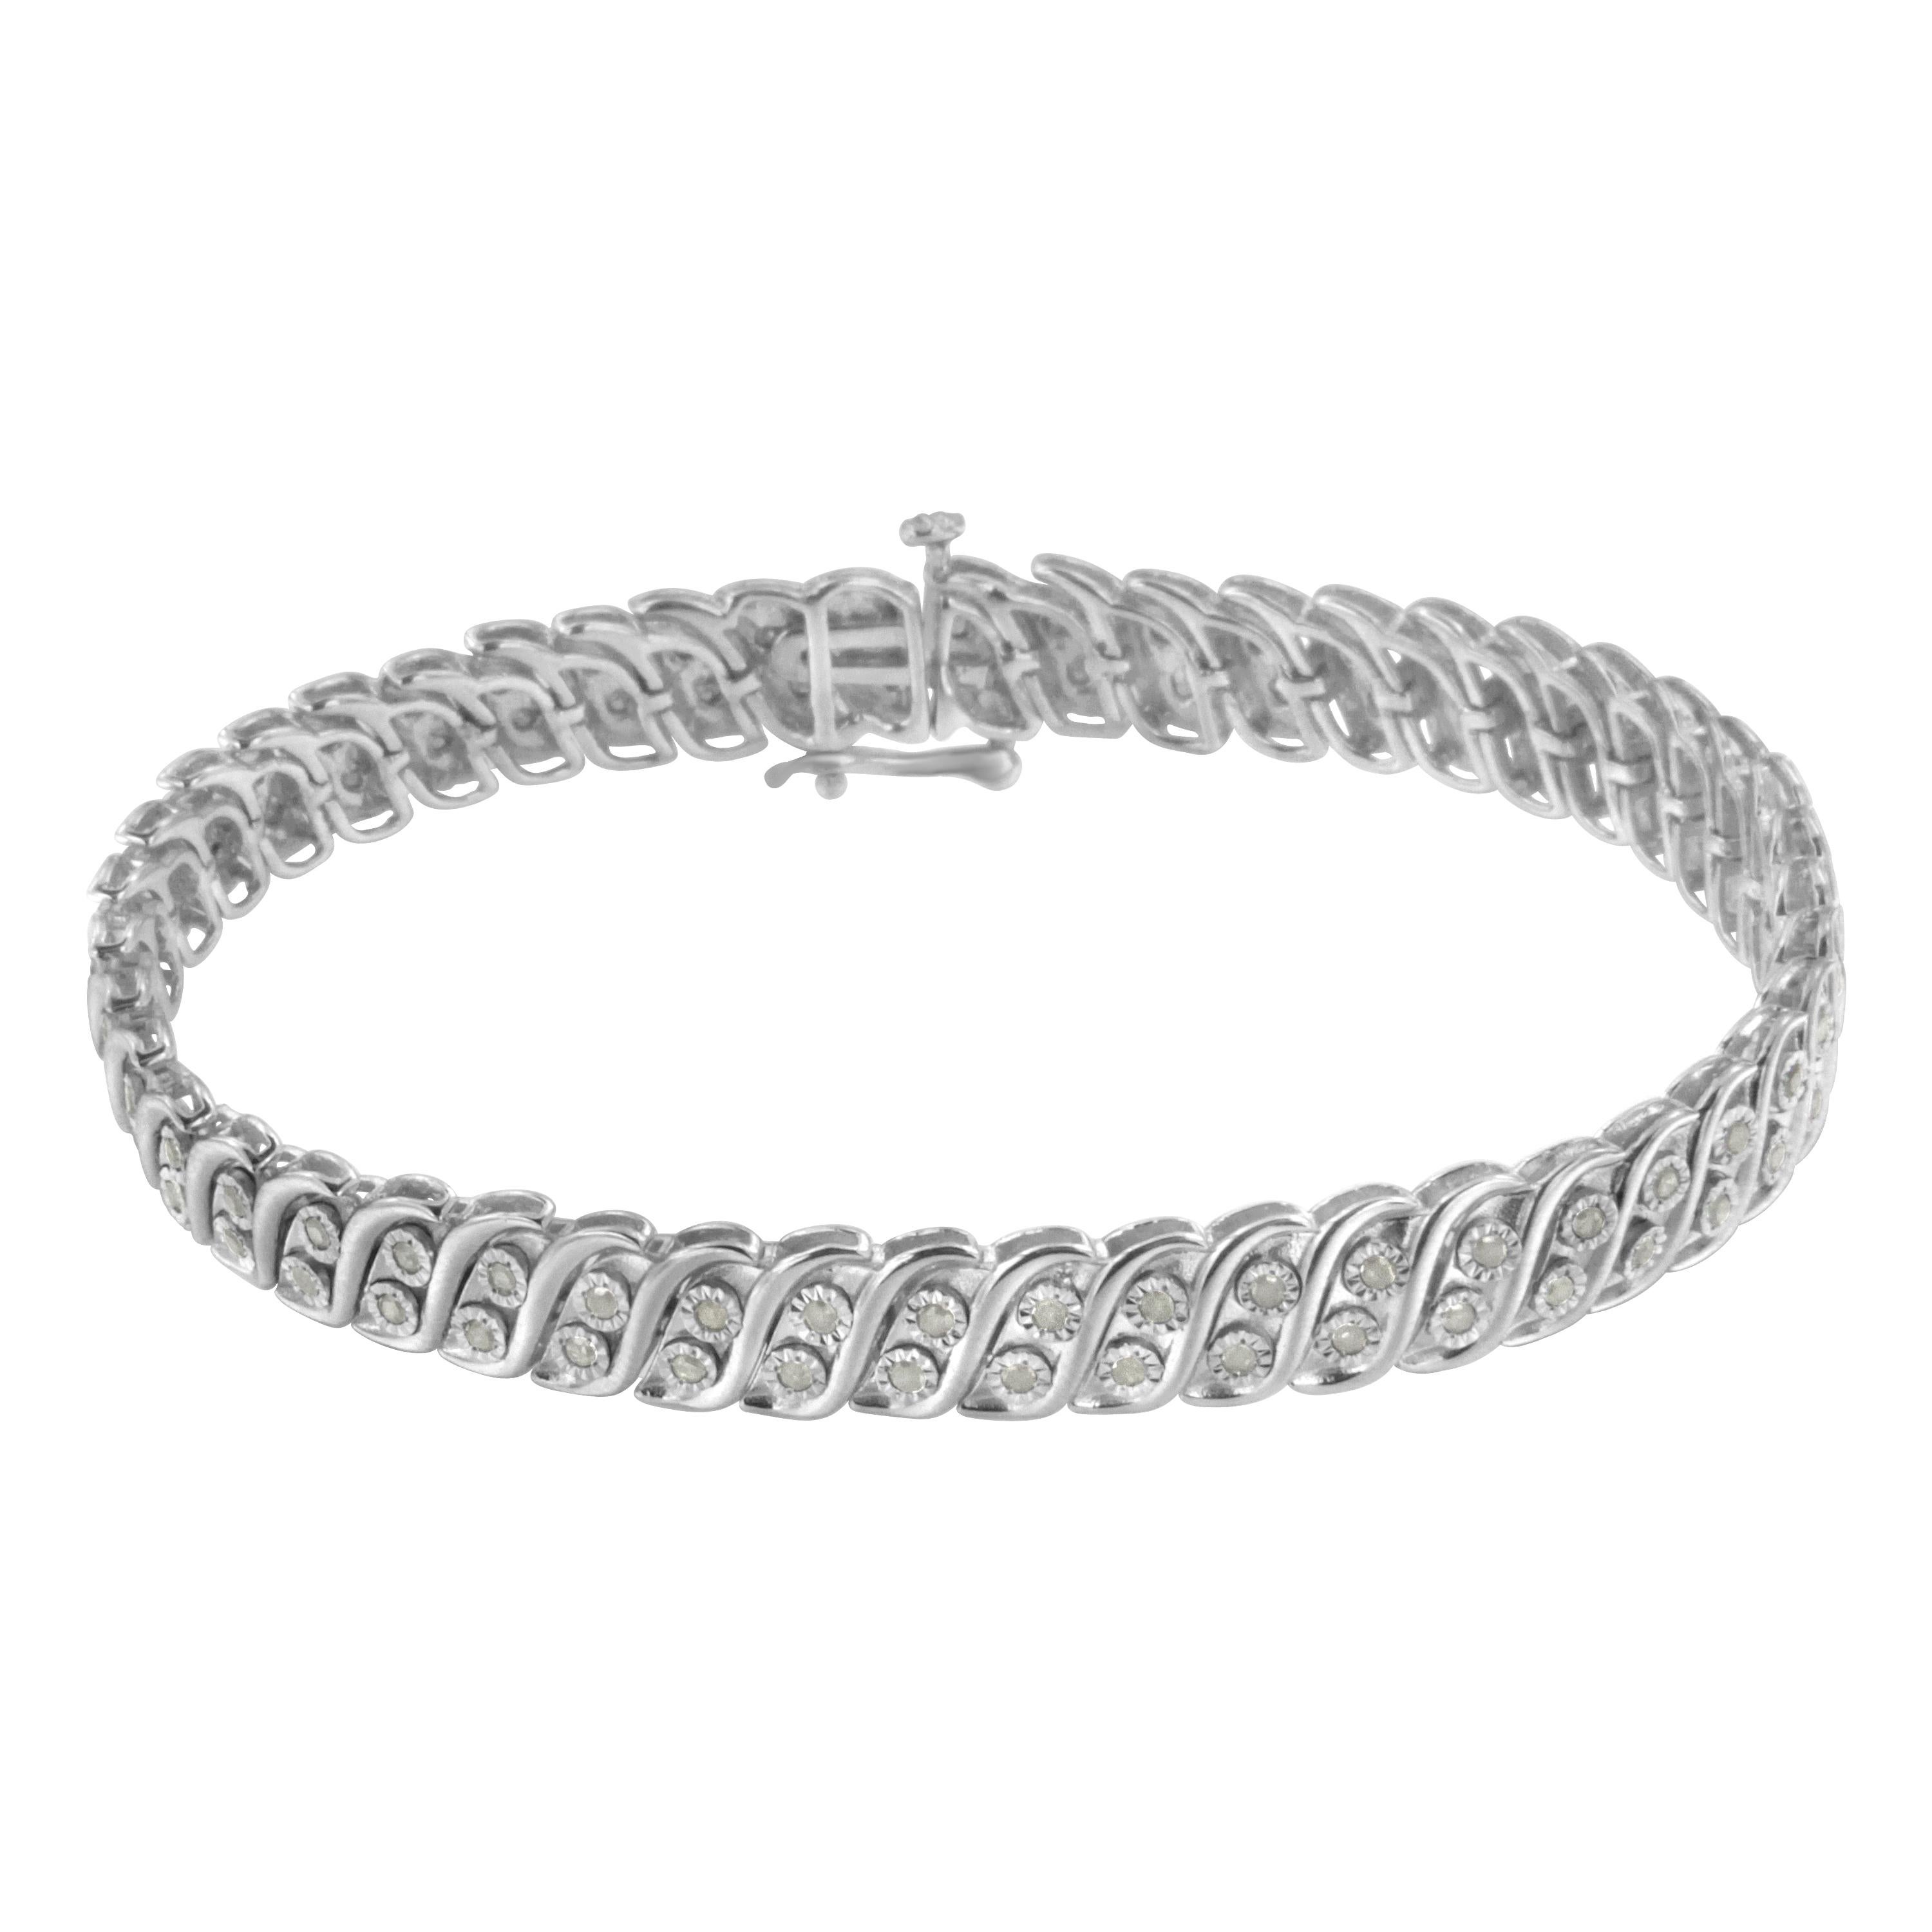 Elegant and timeless, this gorgeous sterling silver tennis bracelet features 1.0 carat total weight of round, rose cut diamonds. The tennis bracelet features S curved links with a duo of petite genuine round near colorless I-J color diamonds